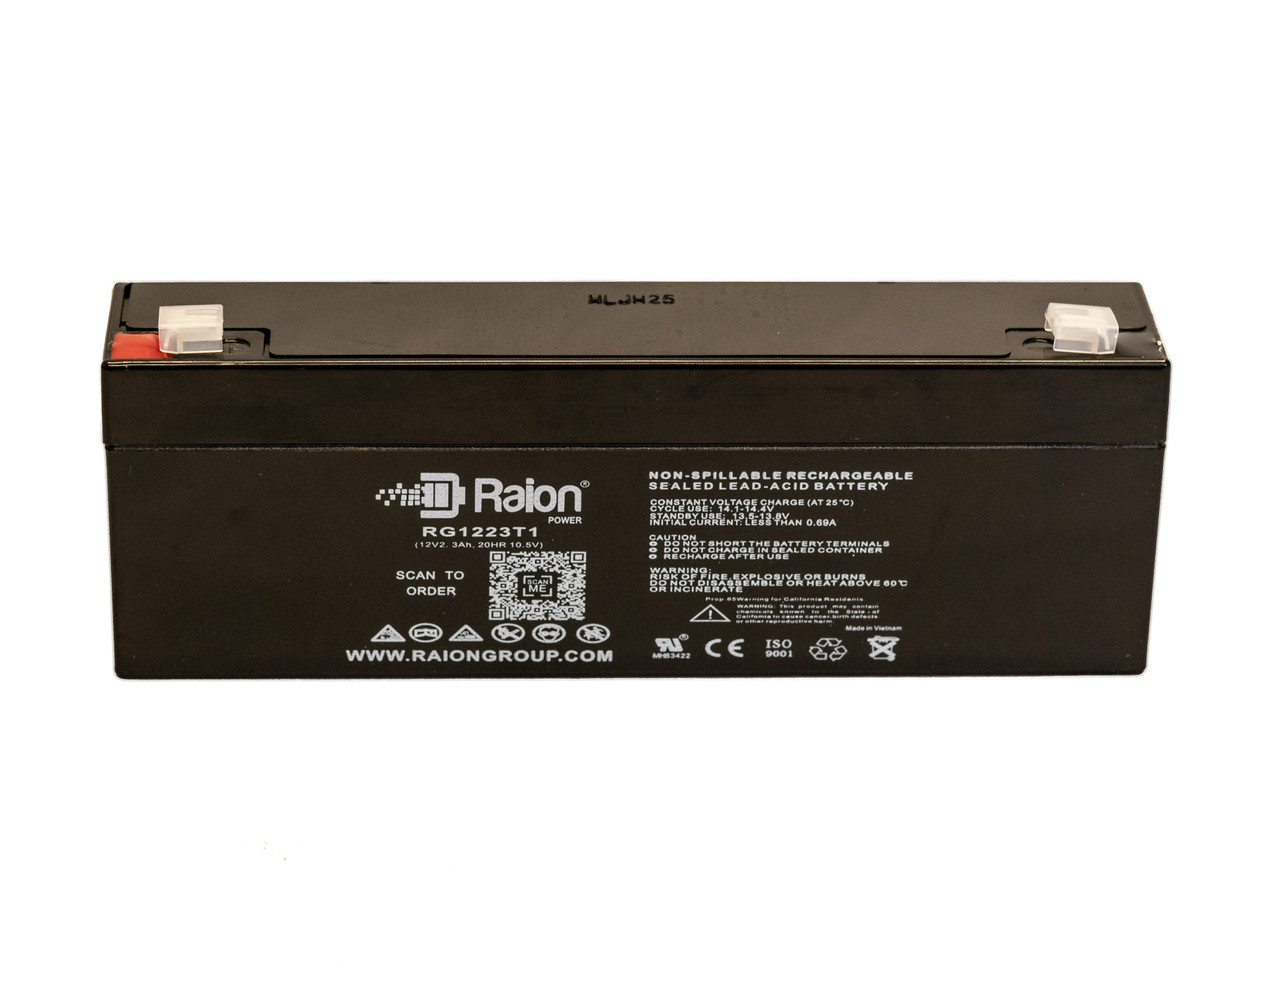 Raion Power 12V 2.3Ah SLA Battery With T1 Terminals For Air Shields Medical SH531151912